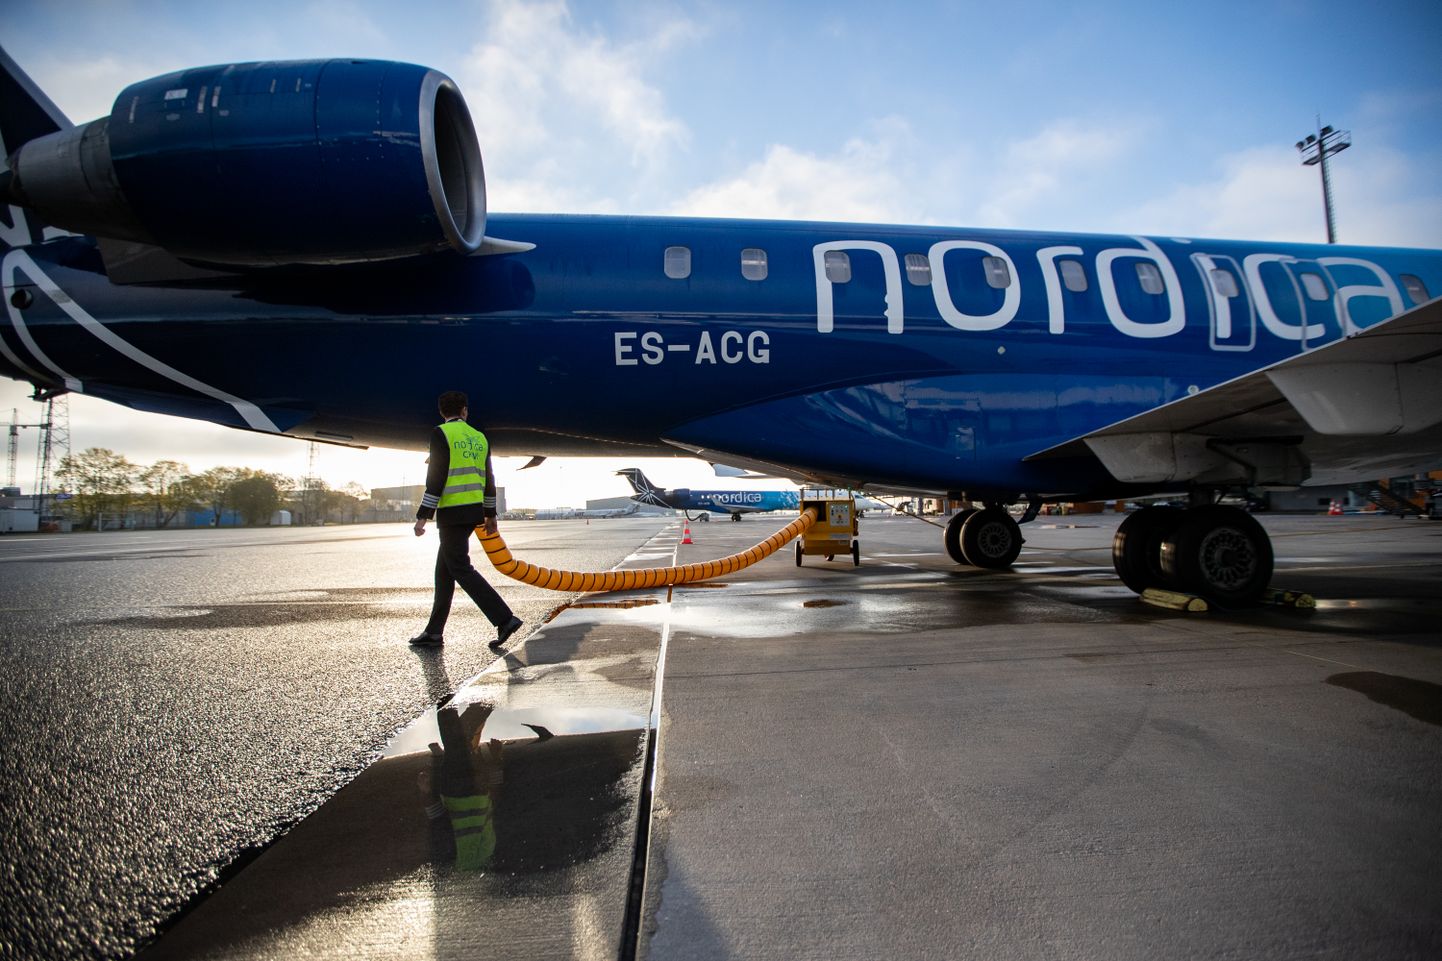 Special audit says Nordica's huge loss mainly attributable to poor management.